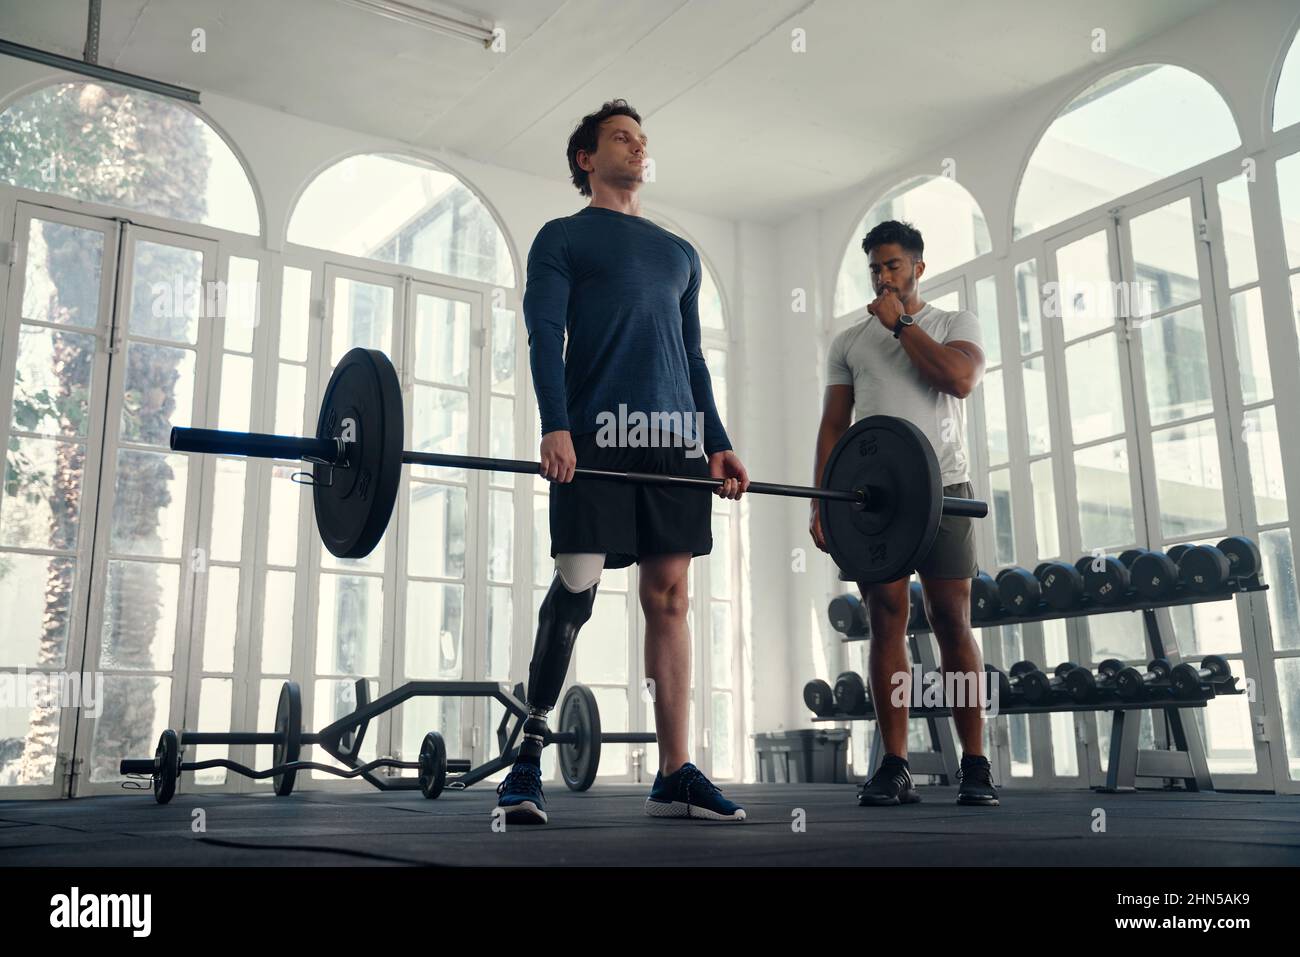 Paralympic athlete weightlifting with his coach in the gym. Man with prosthetic leg being coached by his instructor  Stock Photo